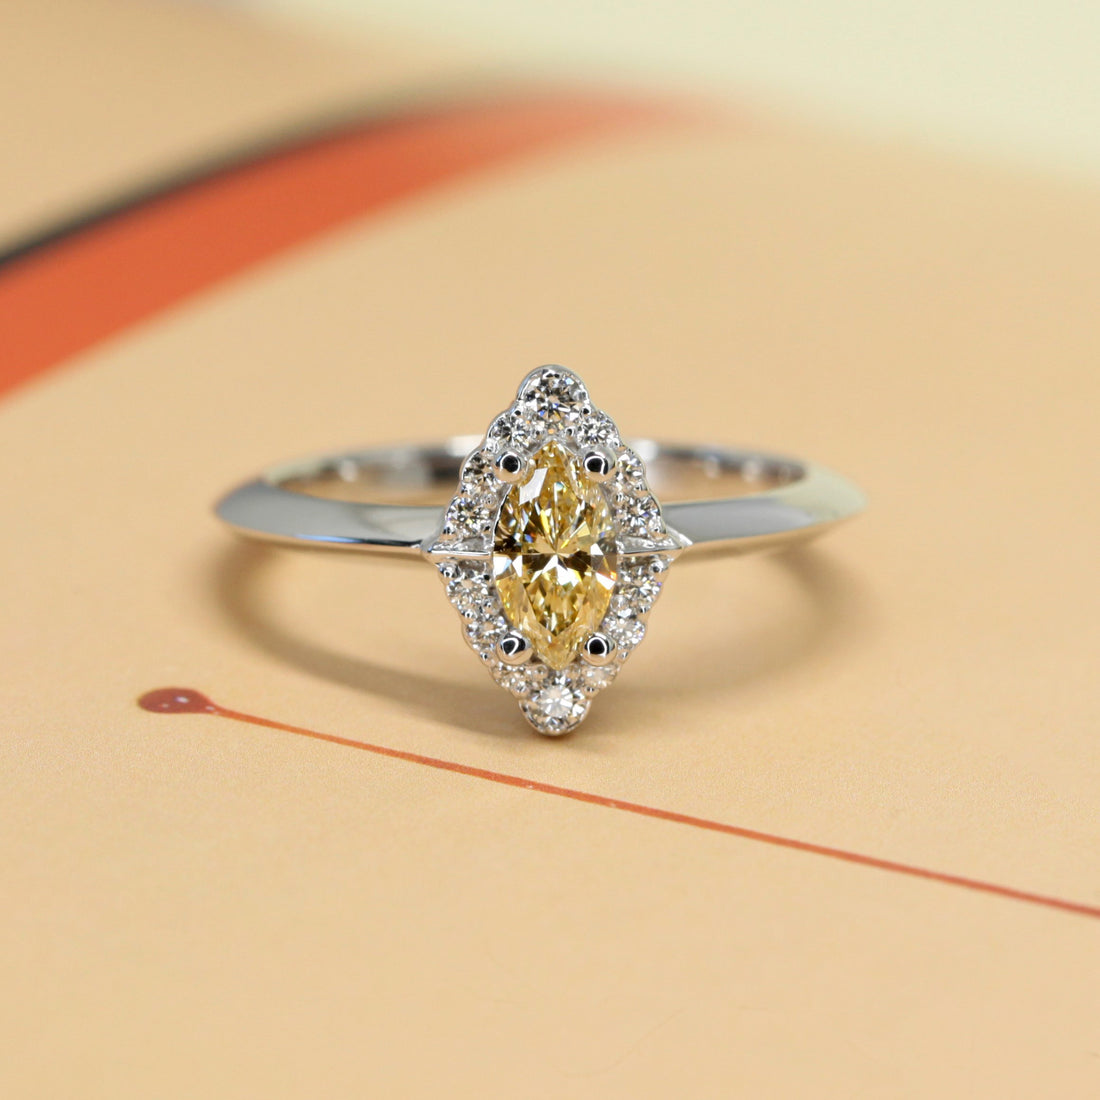 Bena jewelry ring on yellow background marquise shape natural color diamond ring bena jewelry montreal custom made bridal ring with white smal white round diamond fancy diamond halo design white gold ring bridal jewelry little italy jeweler